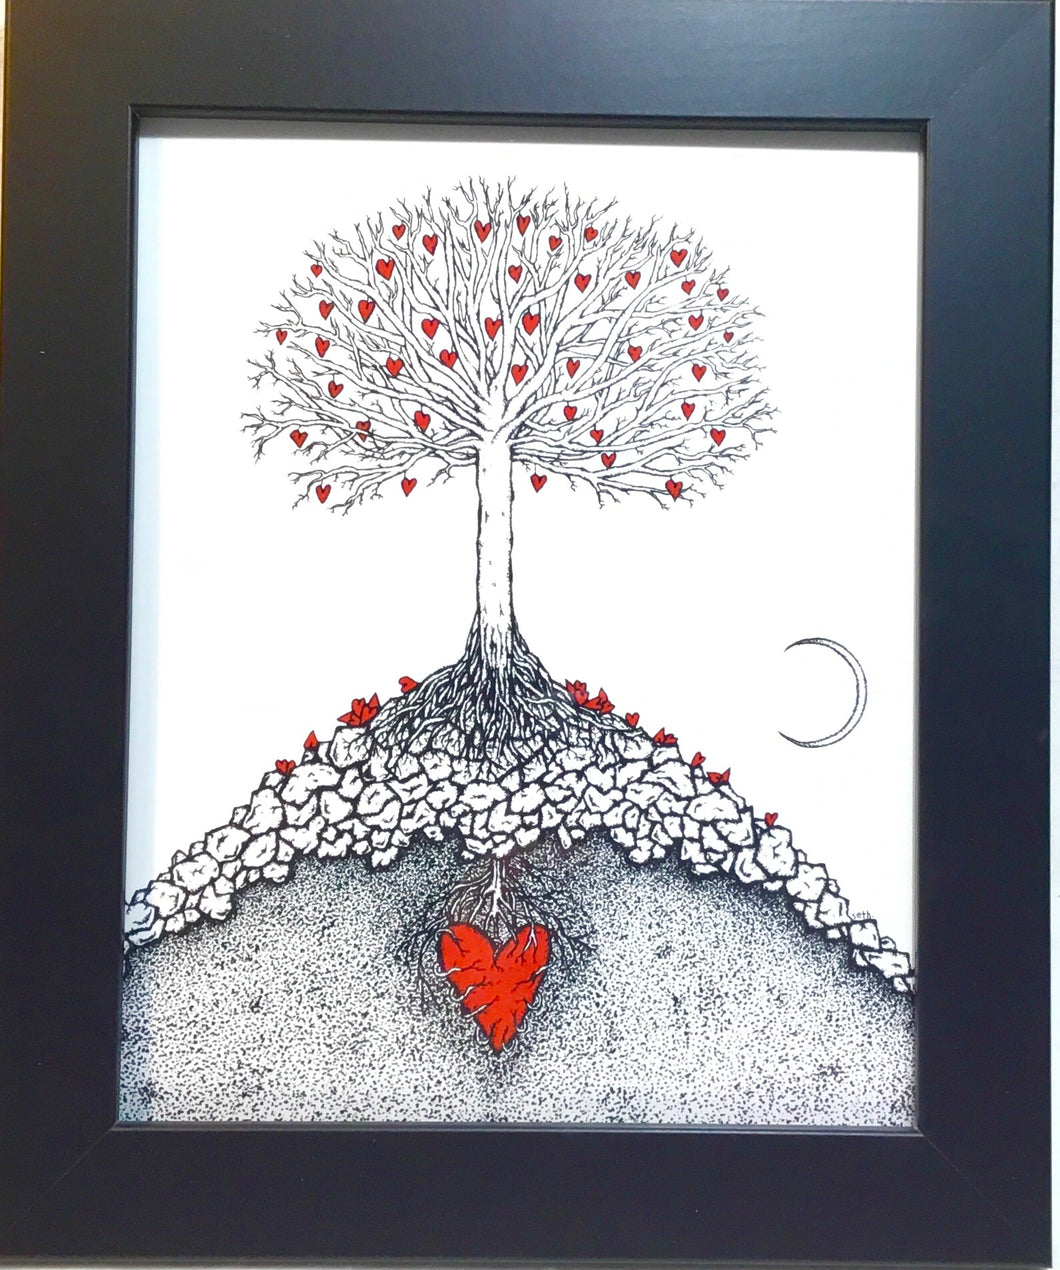 Creatures of the Heart - The Great Tree - Framed Print